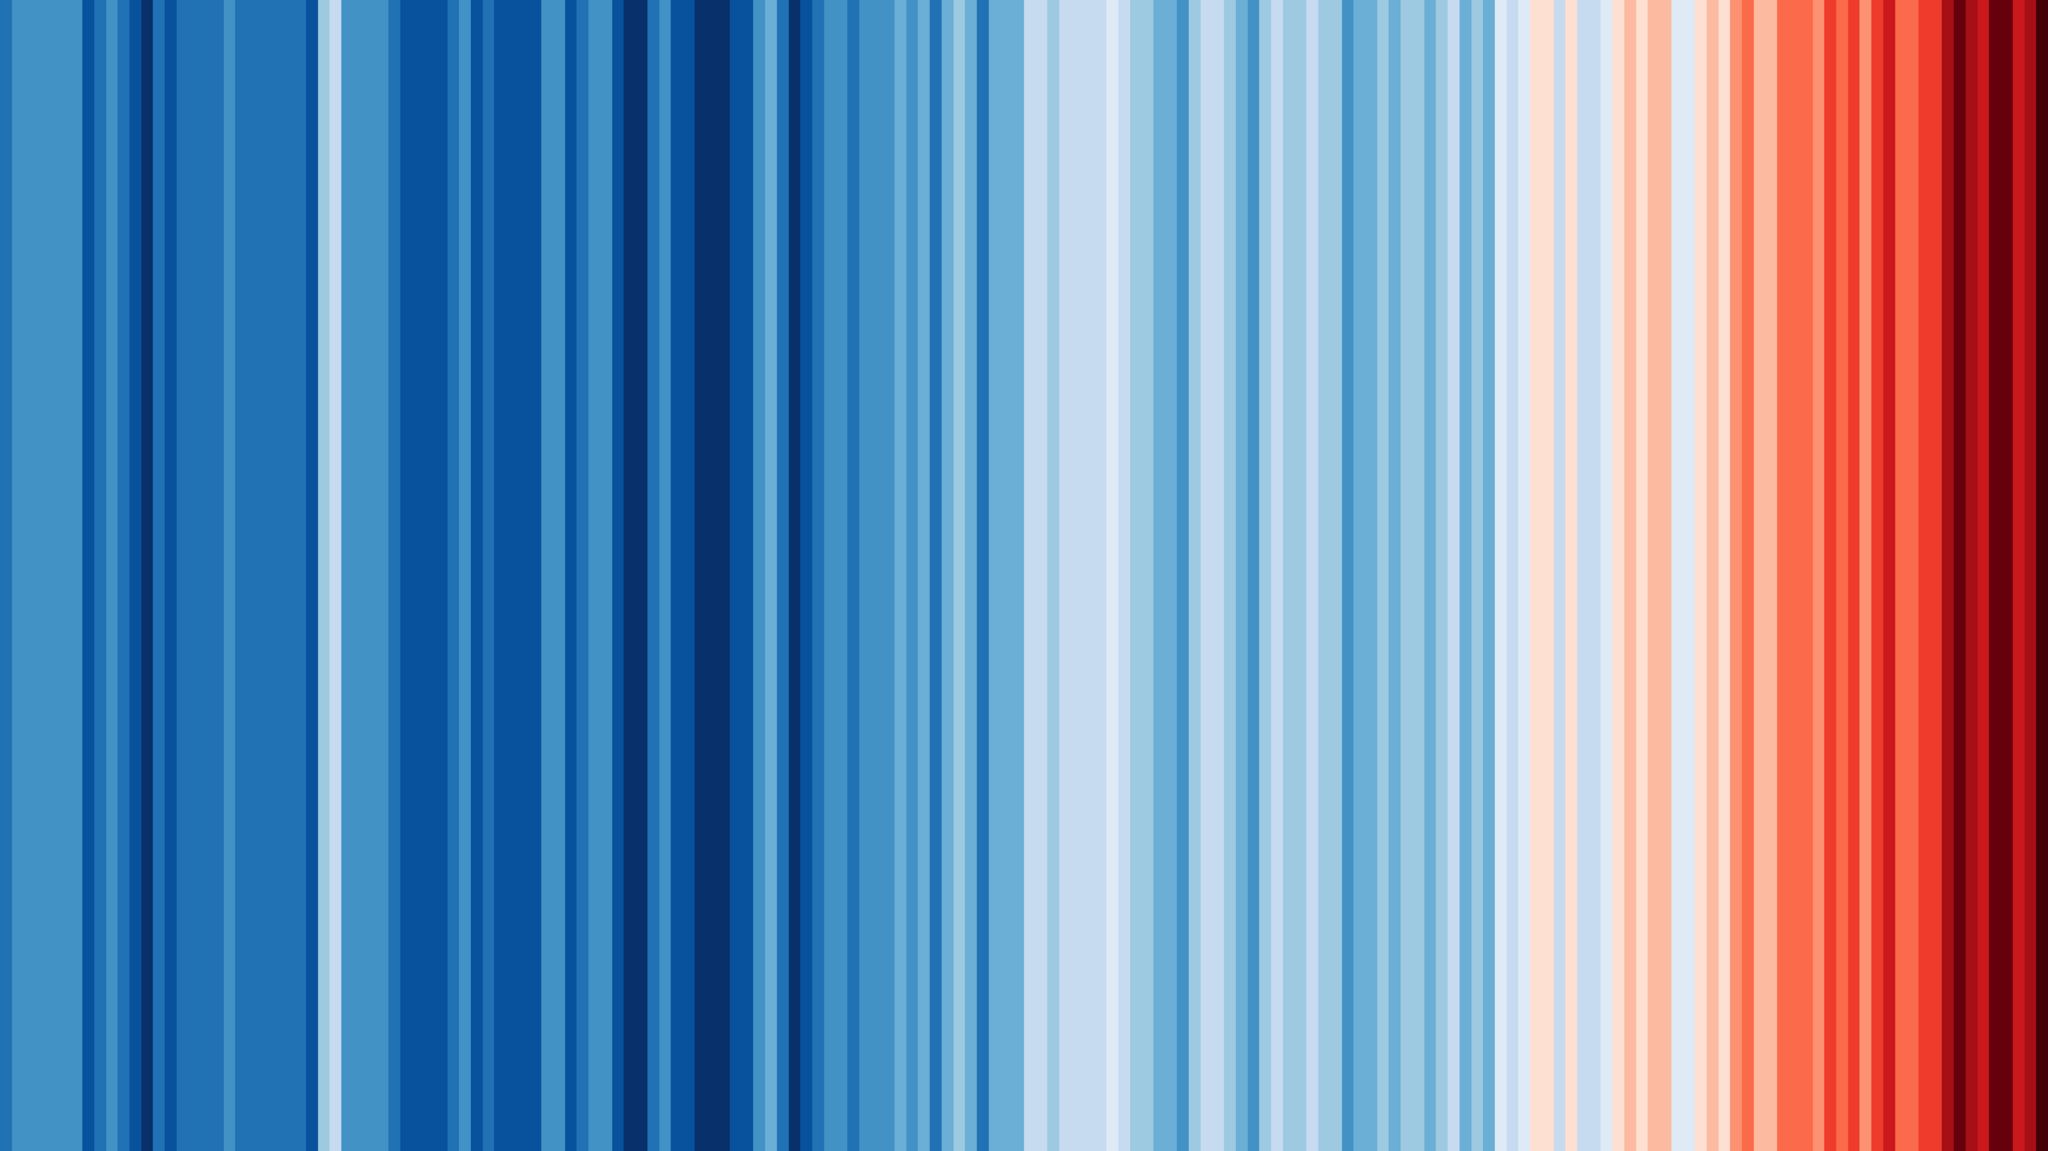 A computer-generated image showing a row of thin vertical stripes, starting blue on the left hand side and gradually turning to deep red on the right hand side